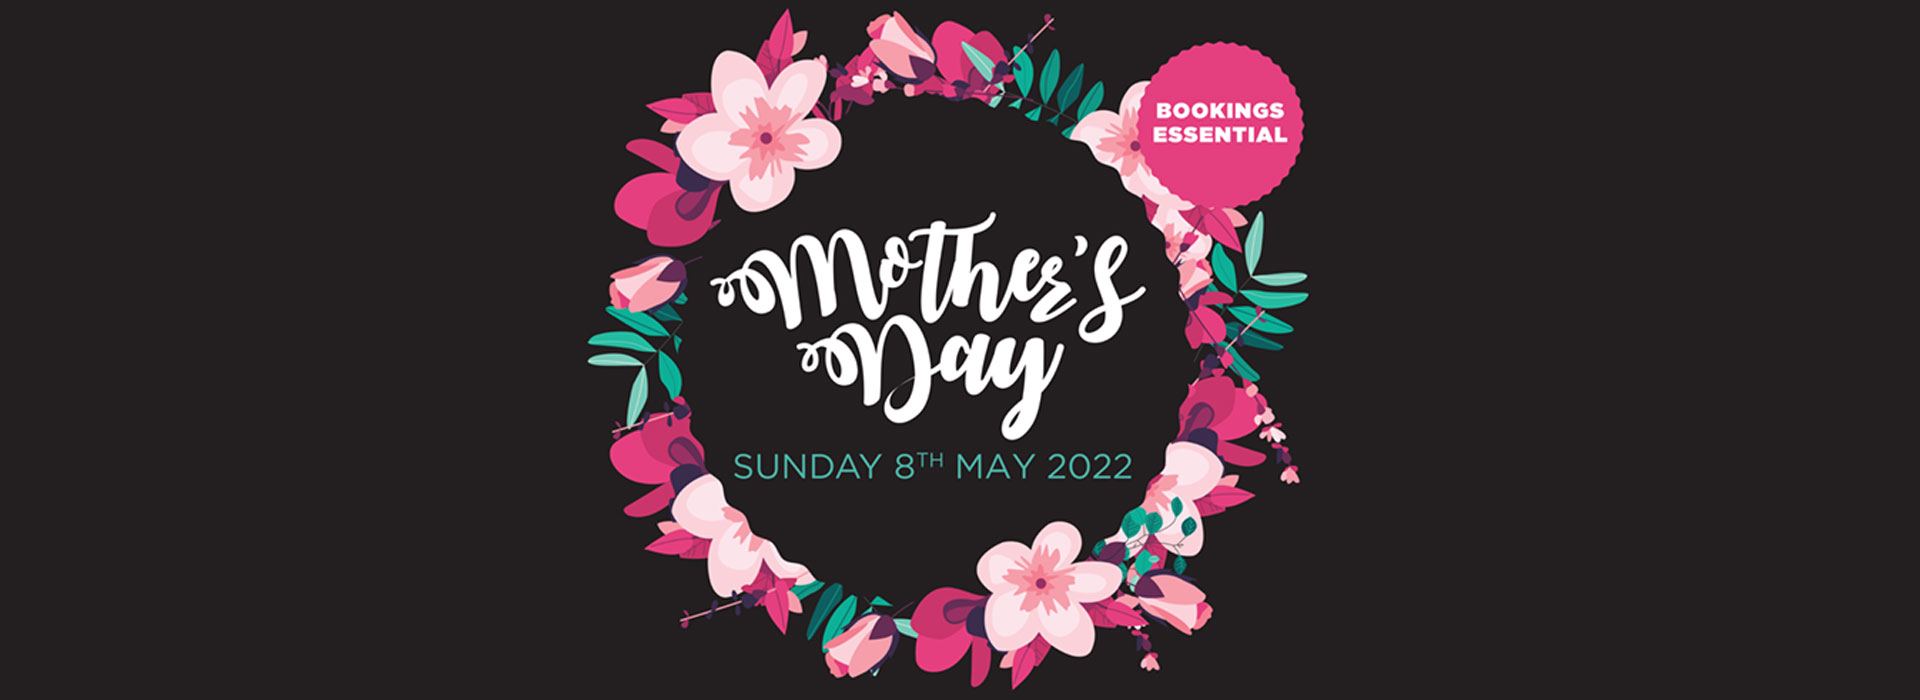 mothers day at glenferrie hotel